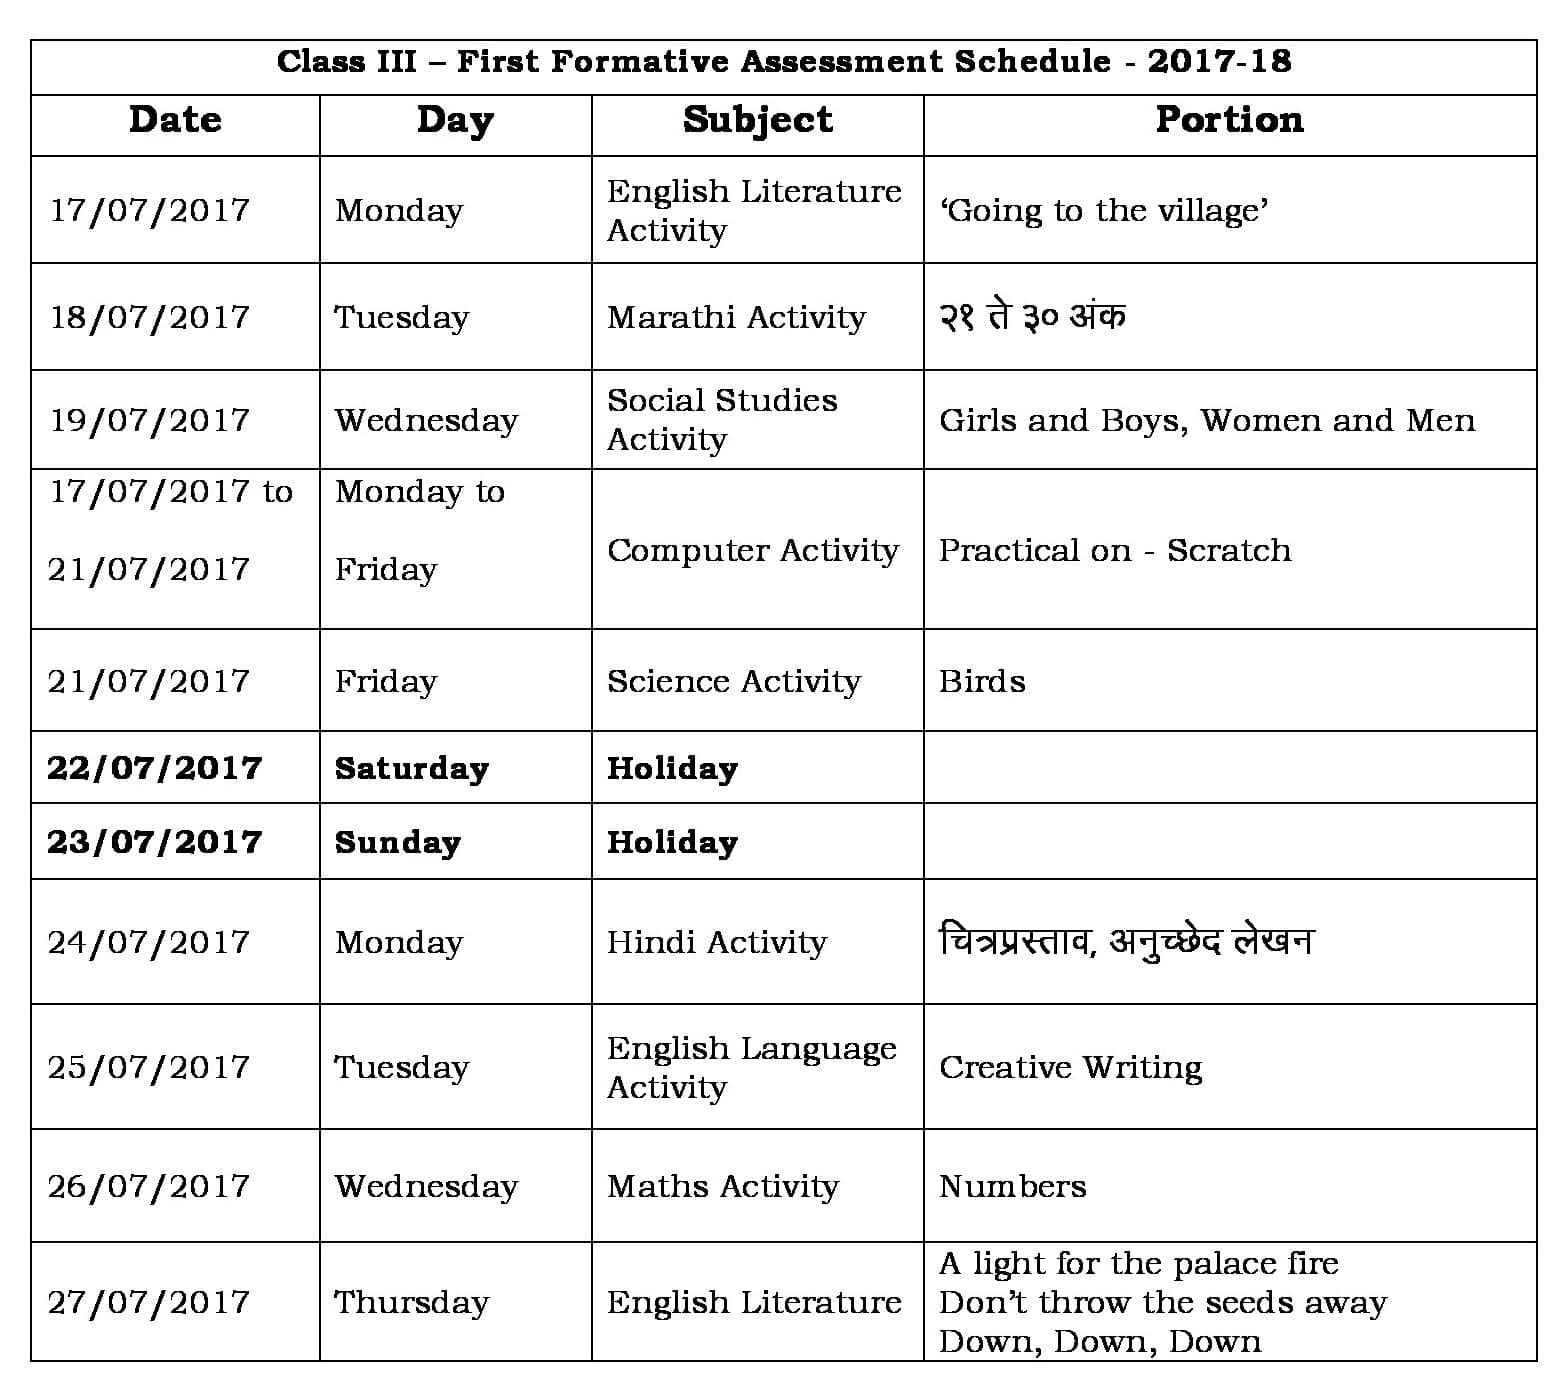 FA1 Portion and Schedule- 2017-18